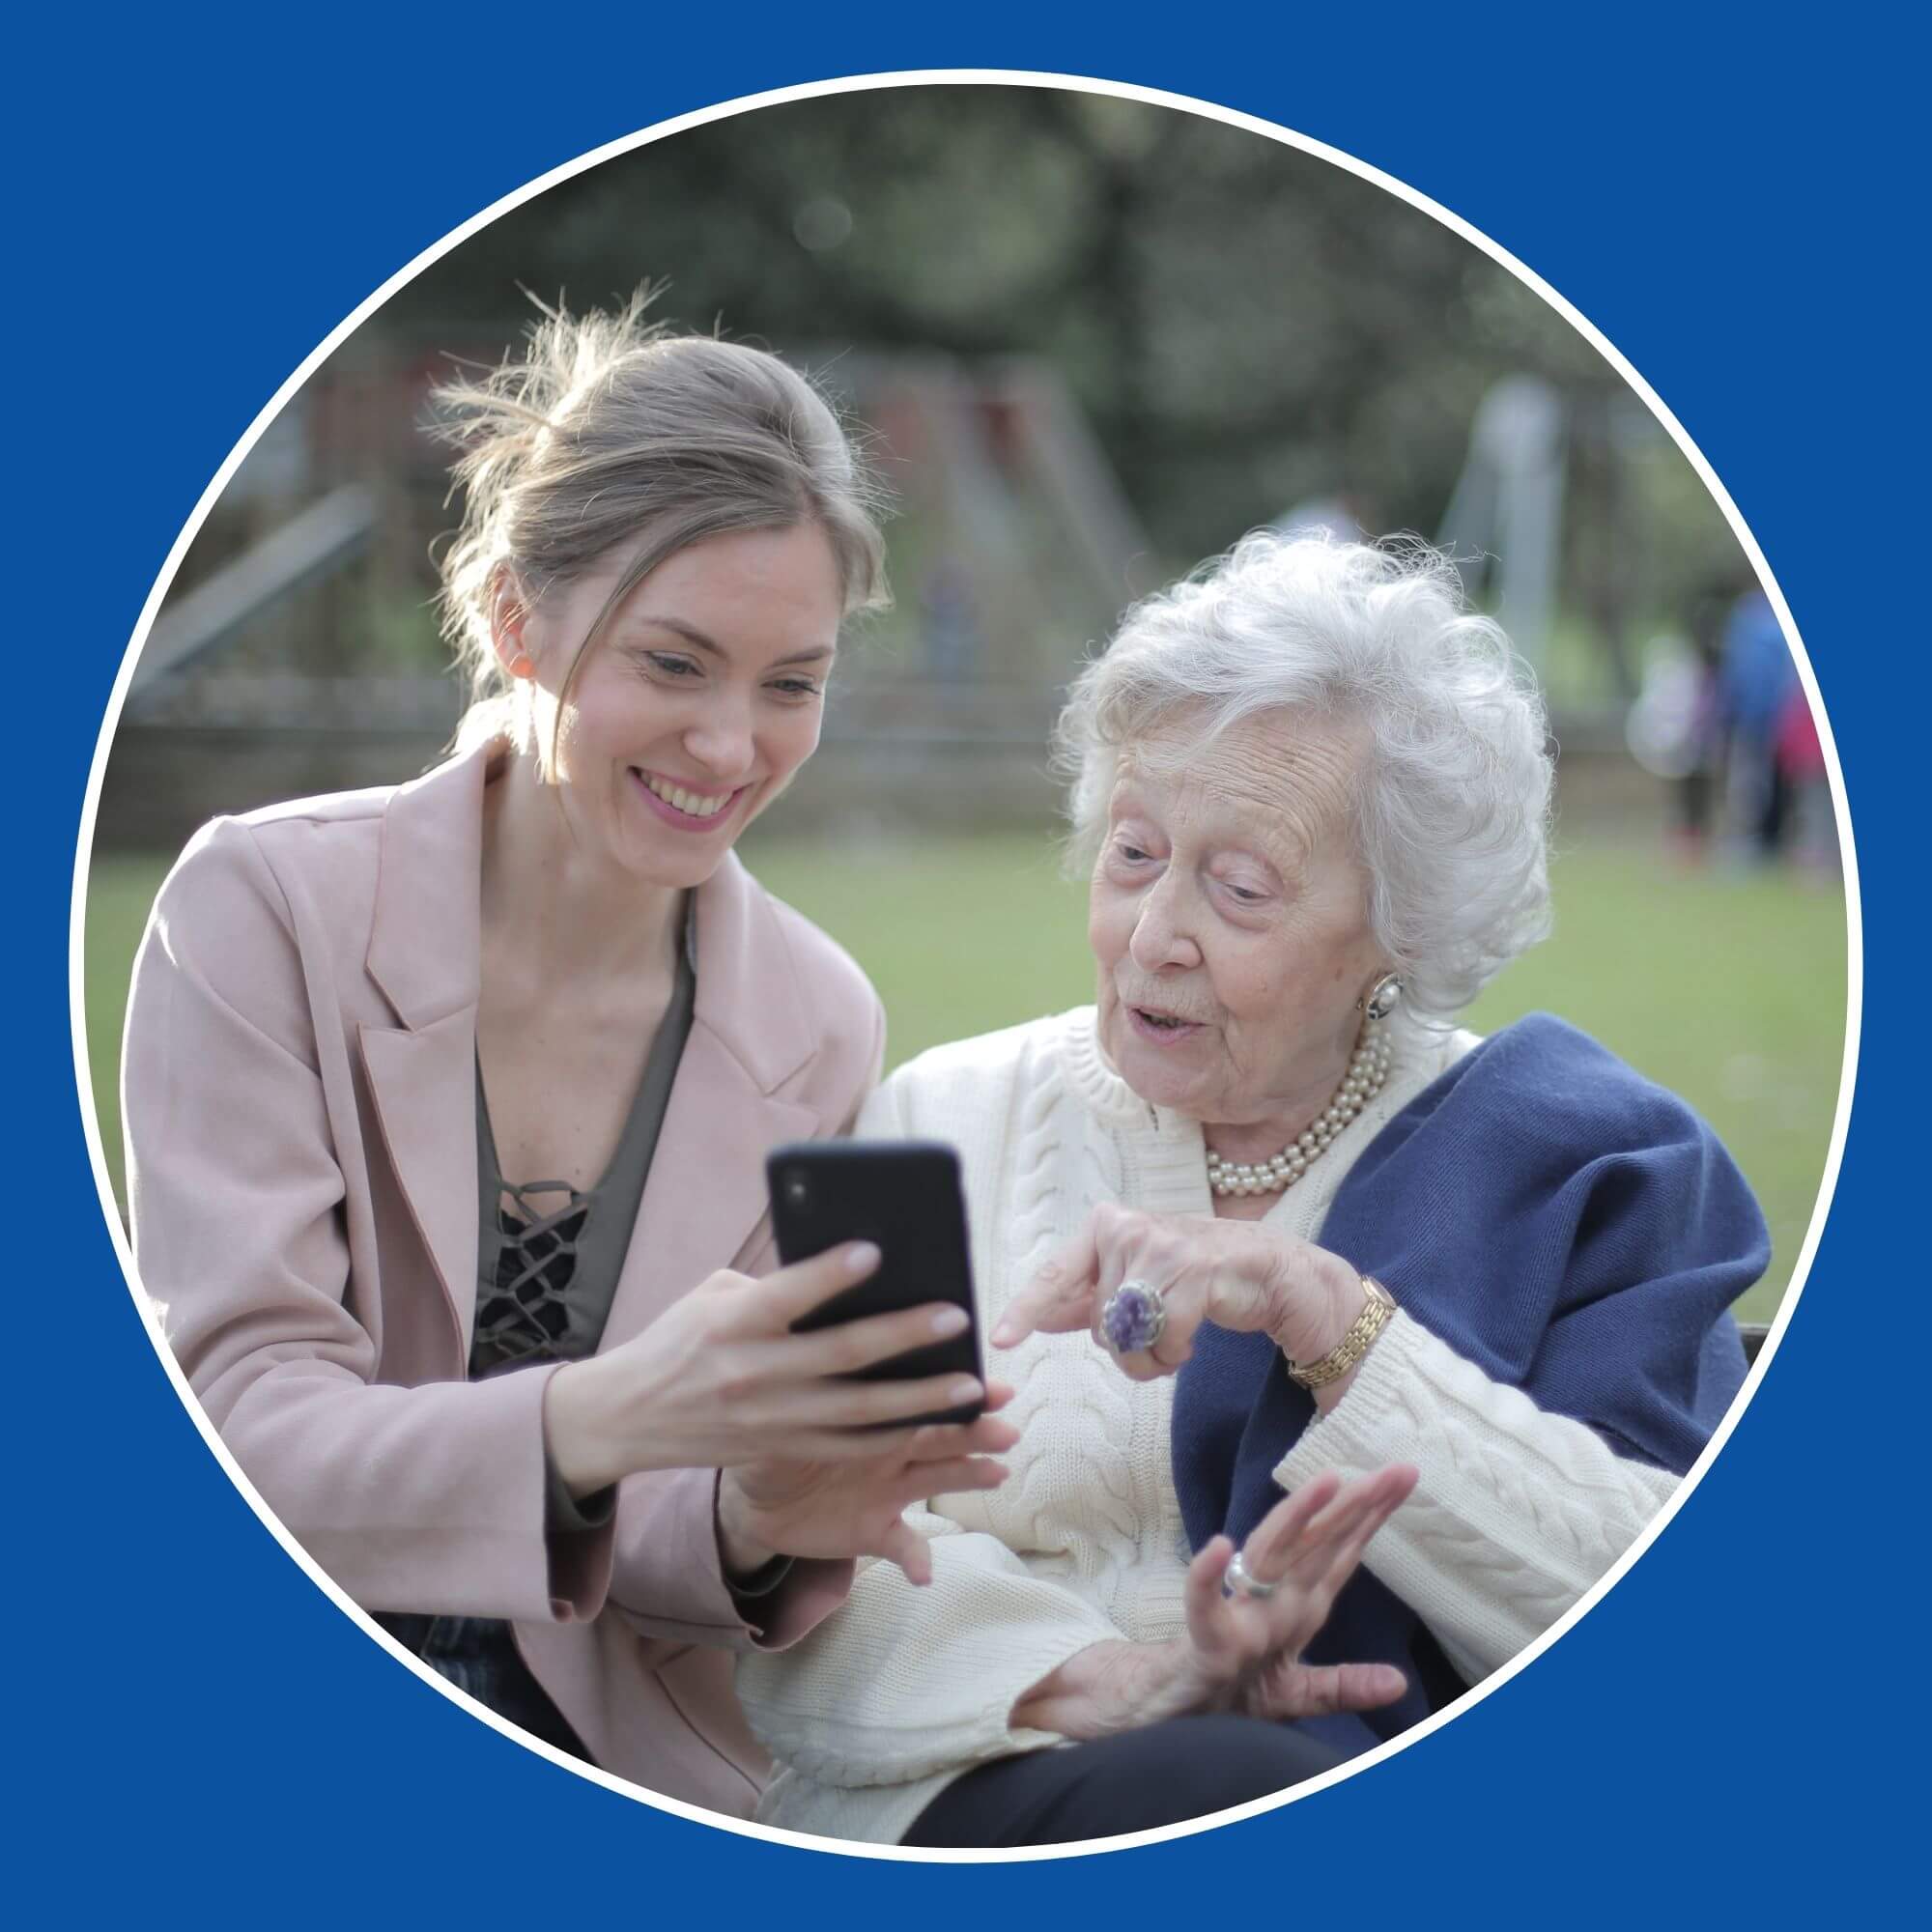 Photo showing a younger lady sitting with an elderly lady in a park, smiling looking at a phone. Image from Pexels (Photographer - Andrea Piacquadi)